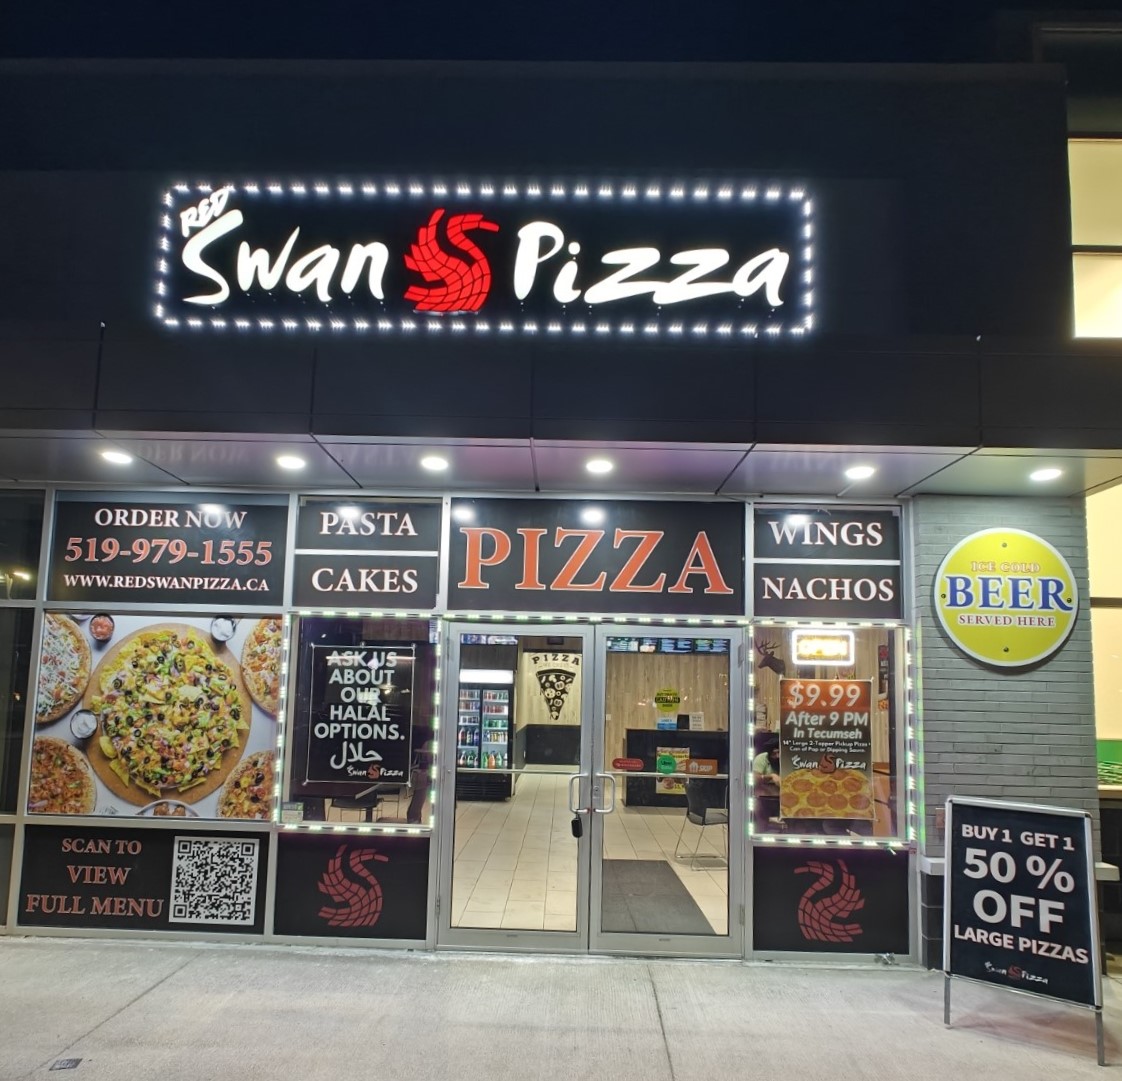 Red Swan Pizza